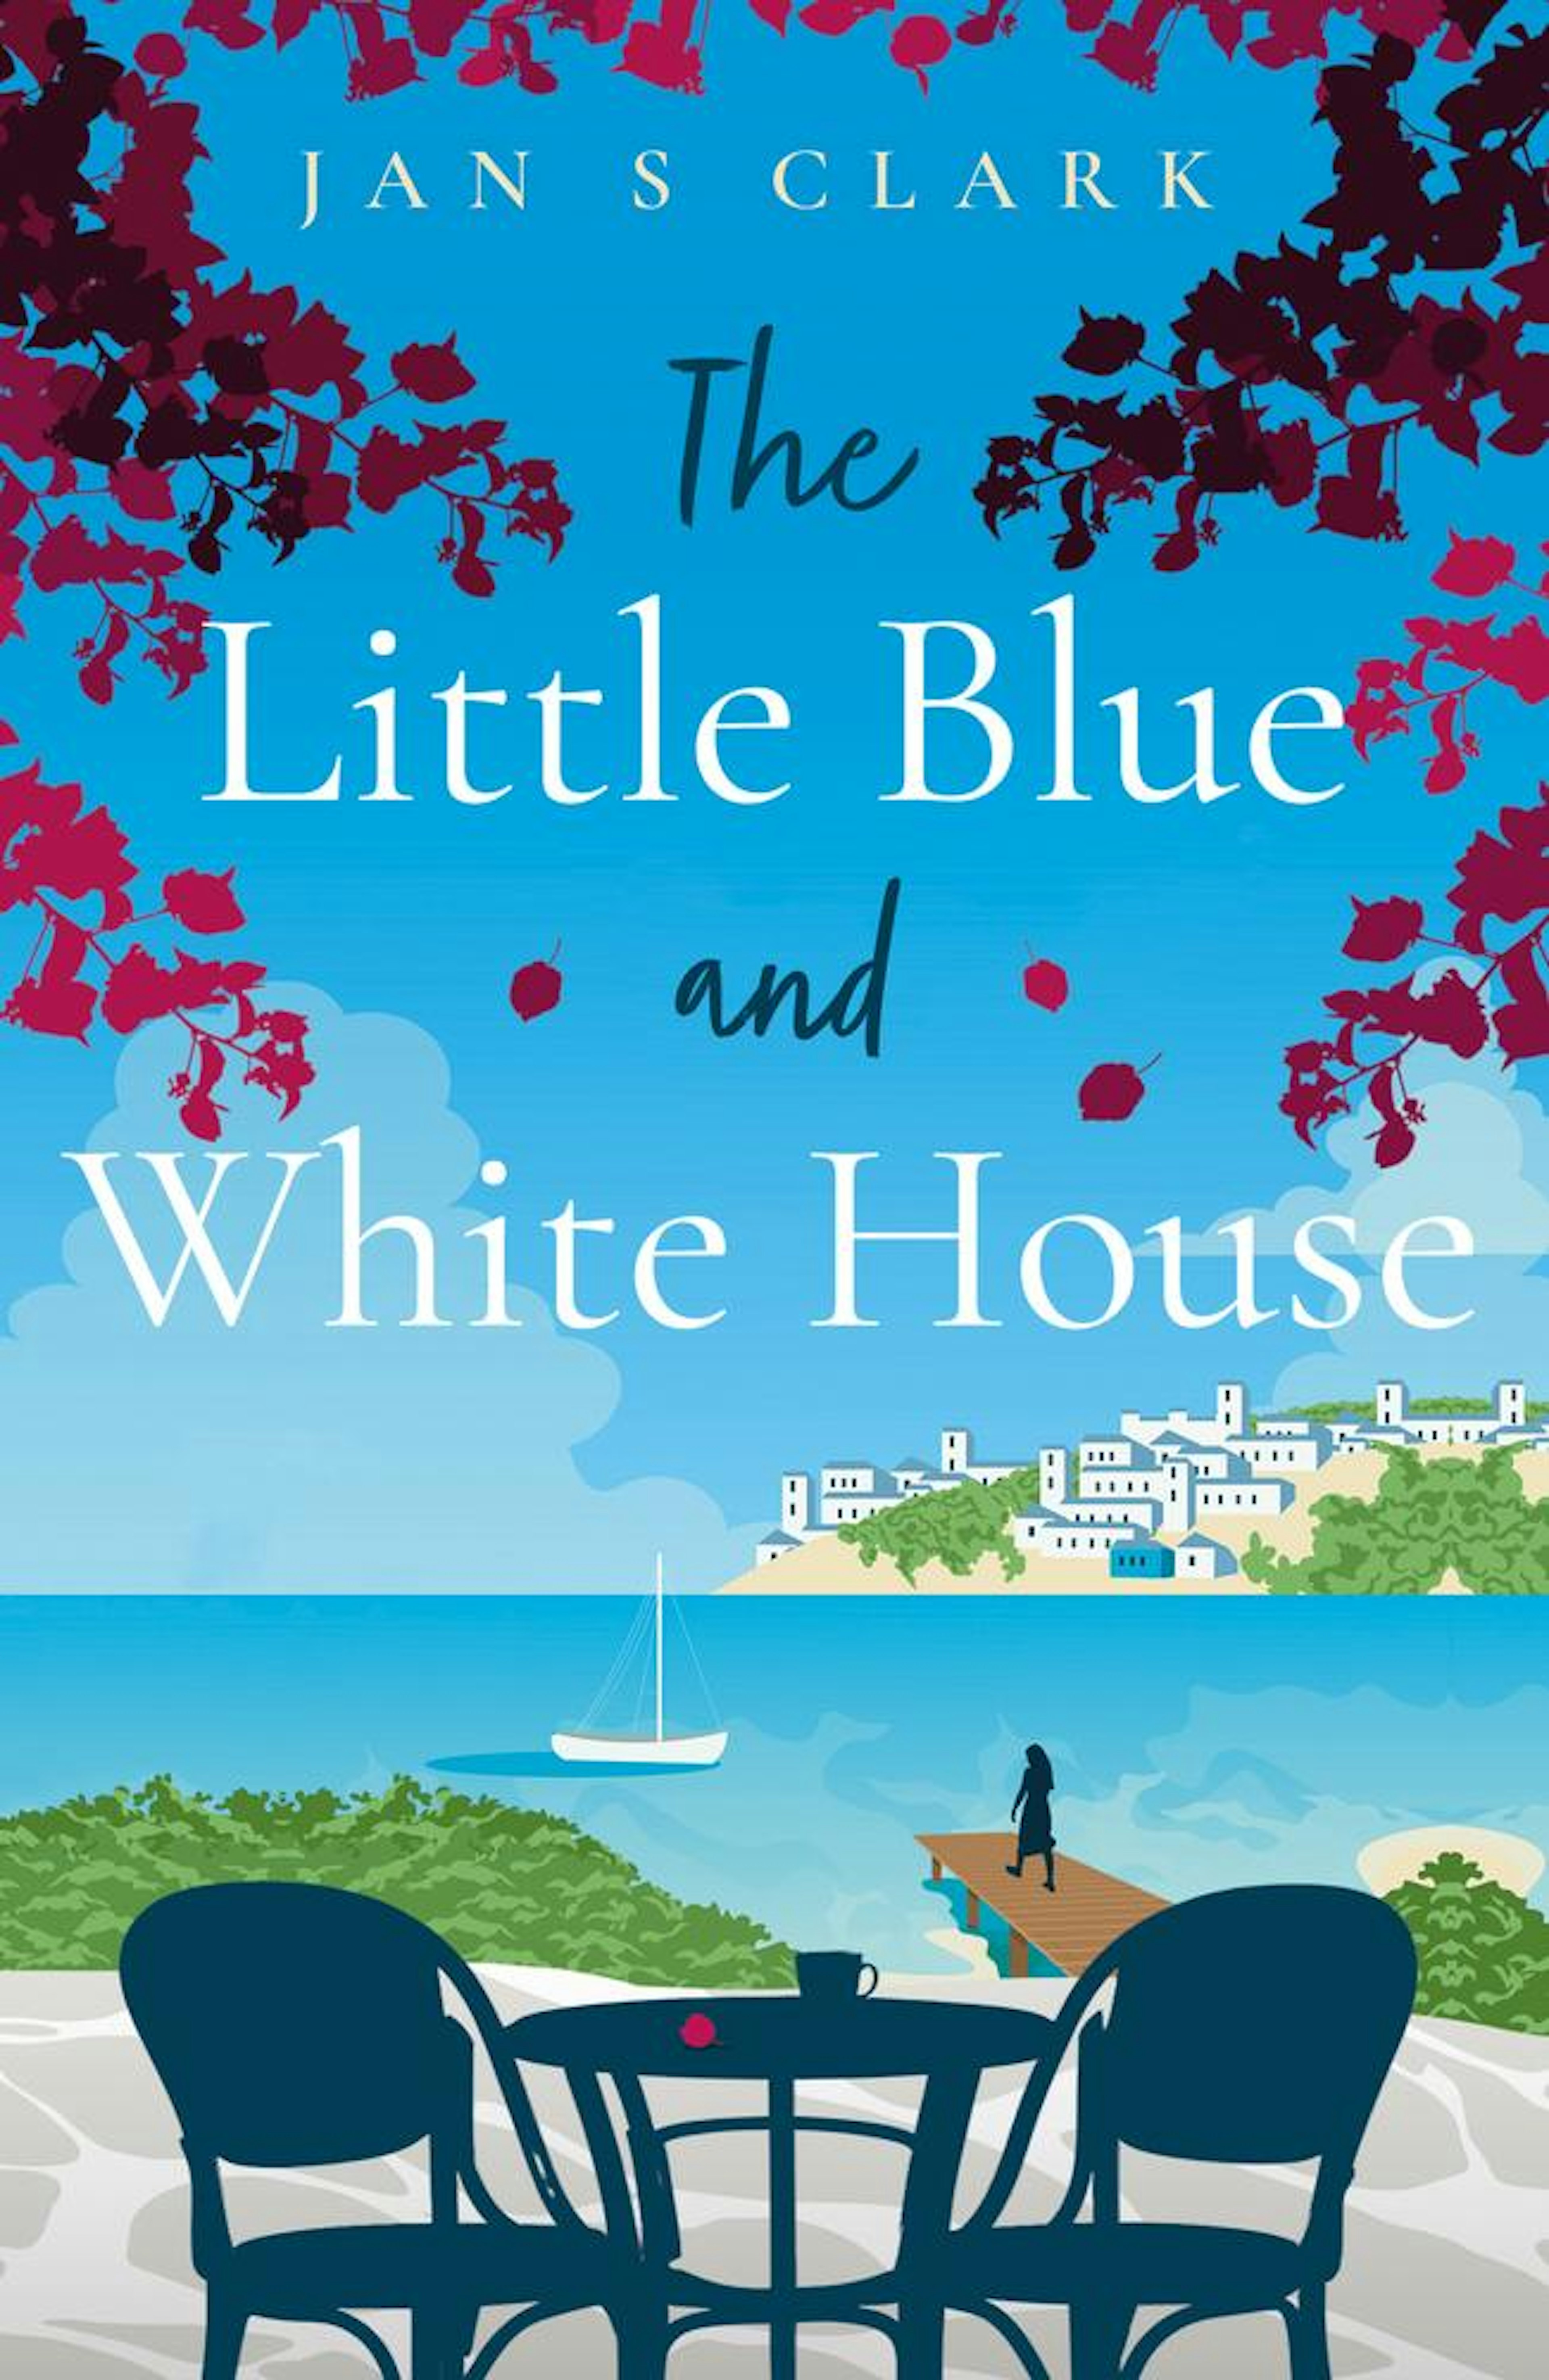 The Little Blue and White House